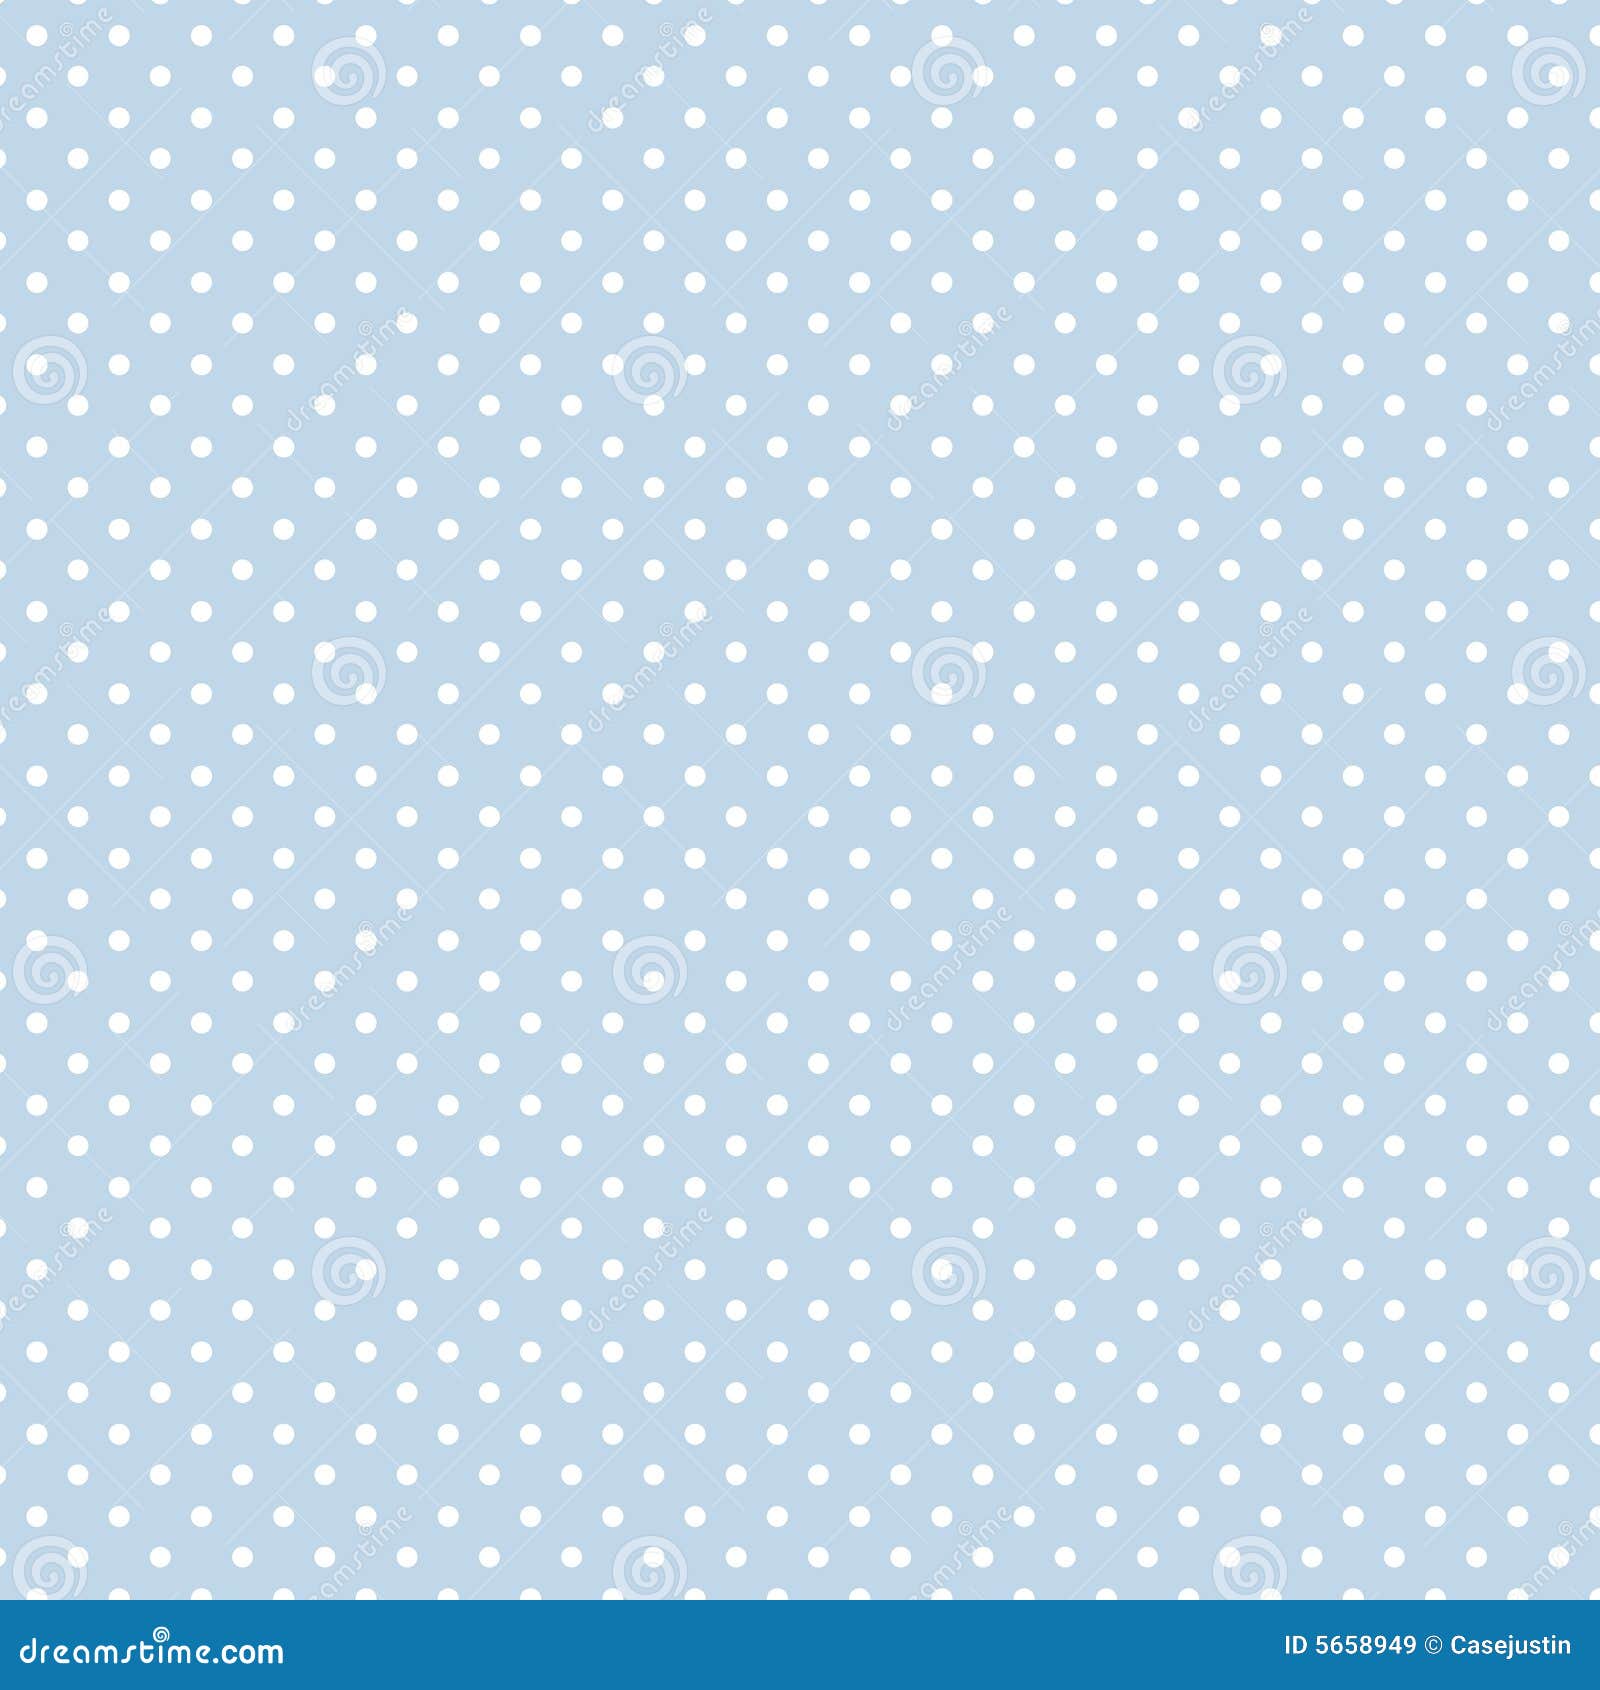 small white polka dots on pastel blue, seamless background